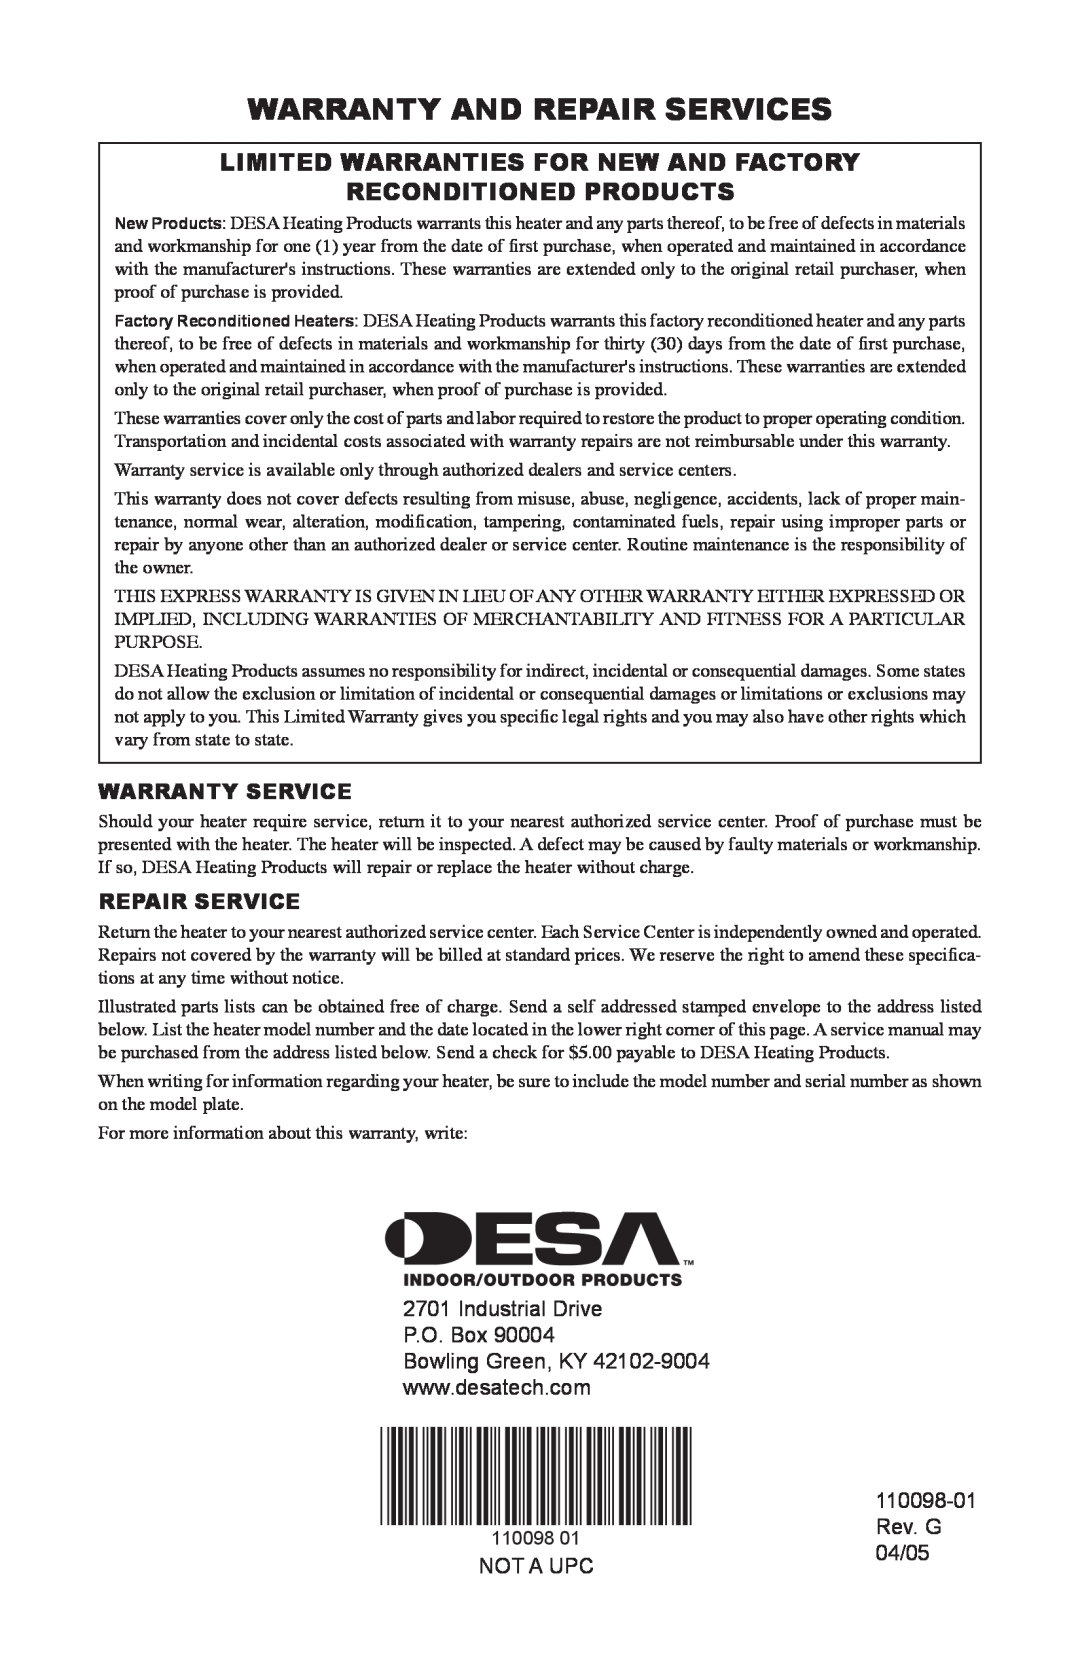 Desa Tech HEATERS OWNER'S MANUAL Warranty And Repair Services, Limited Warranties For New And Factory, Warranty Service 